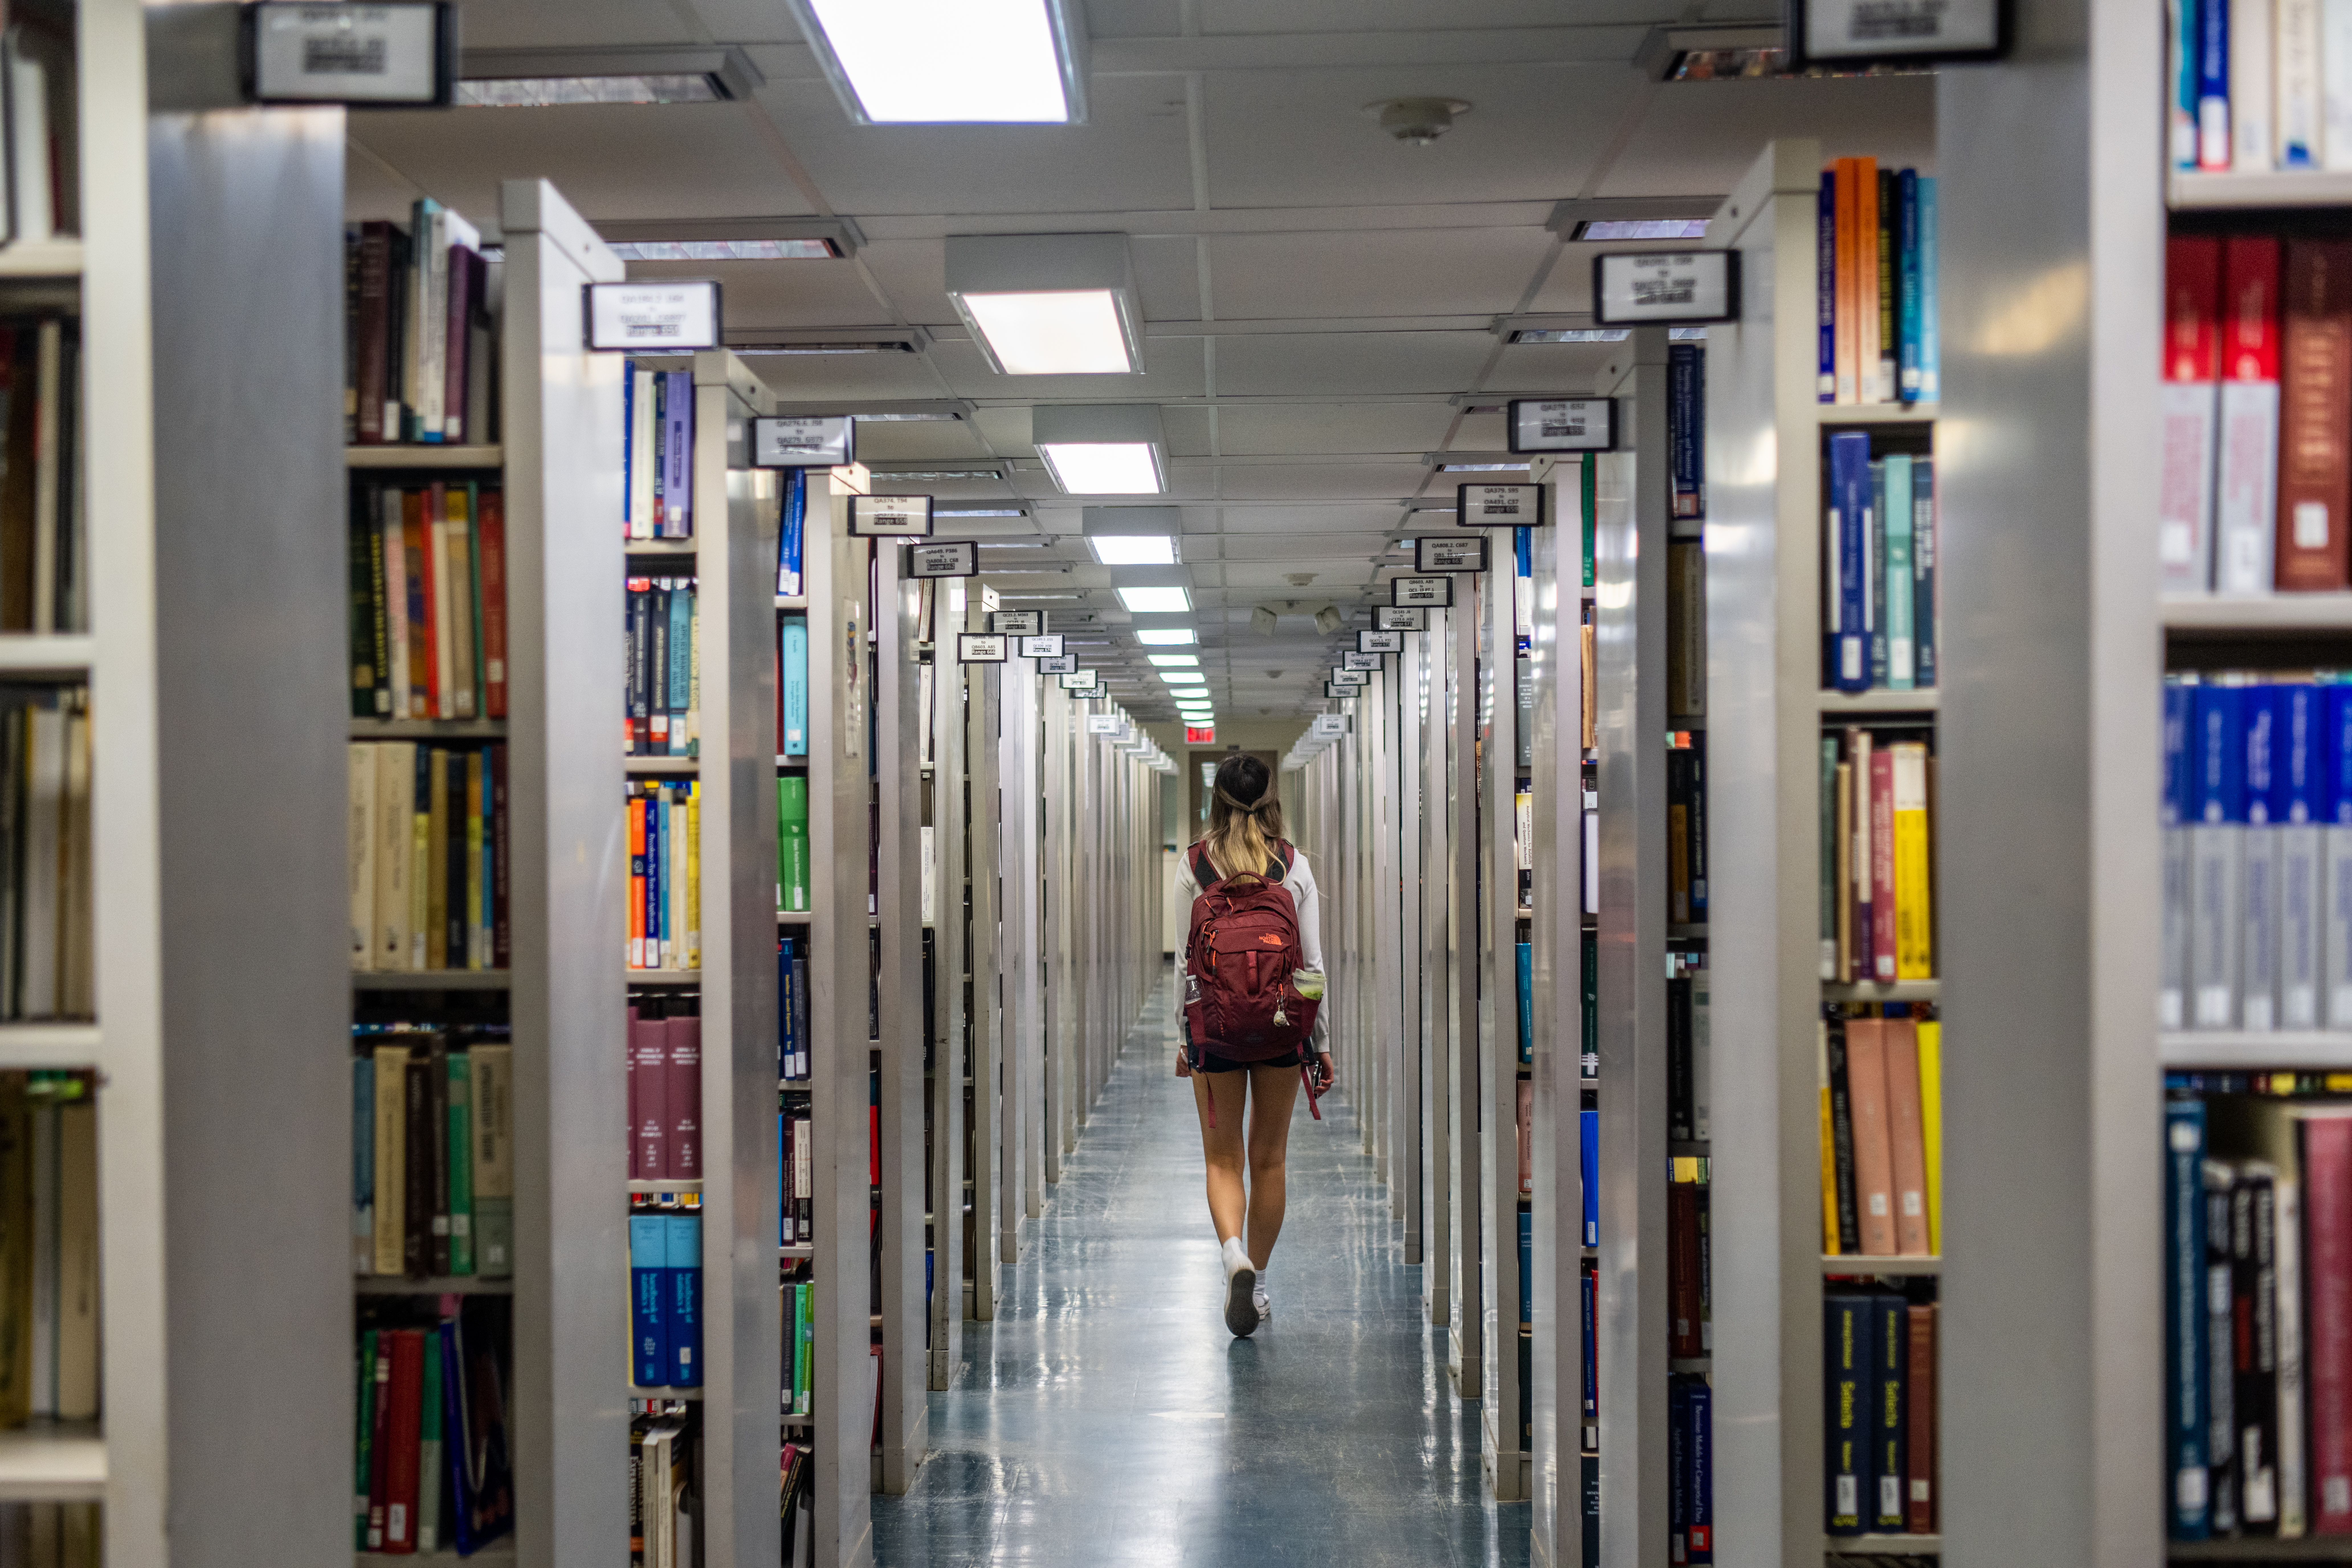 A person walks through the Rice University Library on April 26, 2022 in Houston, Texas. A group of local residents are suing Llano County in federal court for the County's removal and censorship of library books addressing racism and LGBTQ issues. The lawsuit addresses "censorship of public libraries being a violation of the first and fourteenth amendments" and comes as conservatives continue to seek and implement restrictions on children's content covering American history, racism, and LGBTQ issues. (Photo by Brandon Bell/Getty Images)